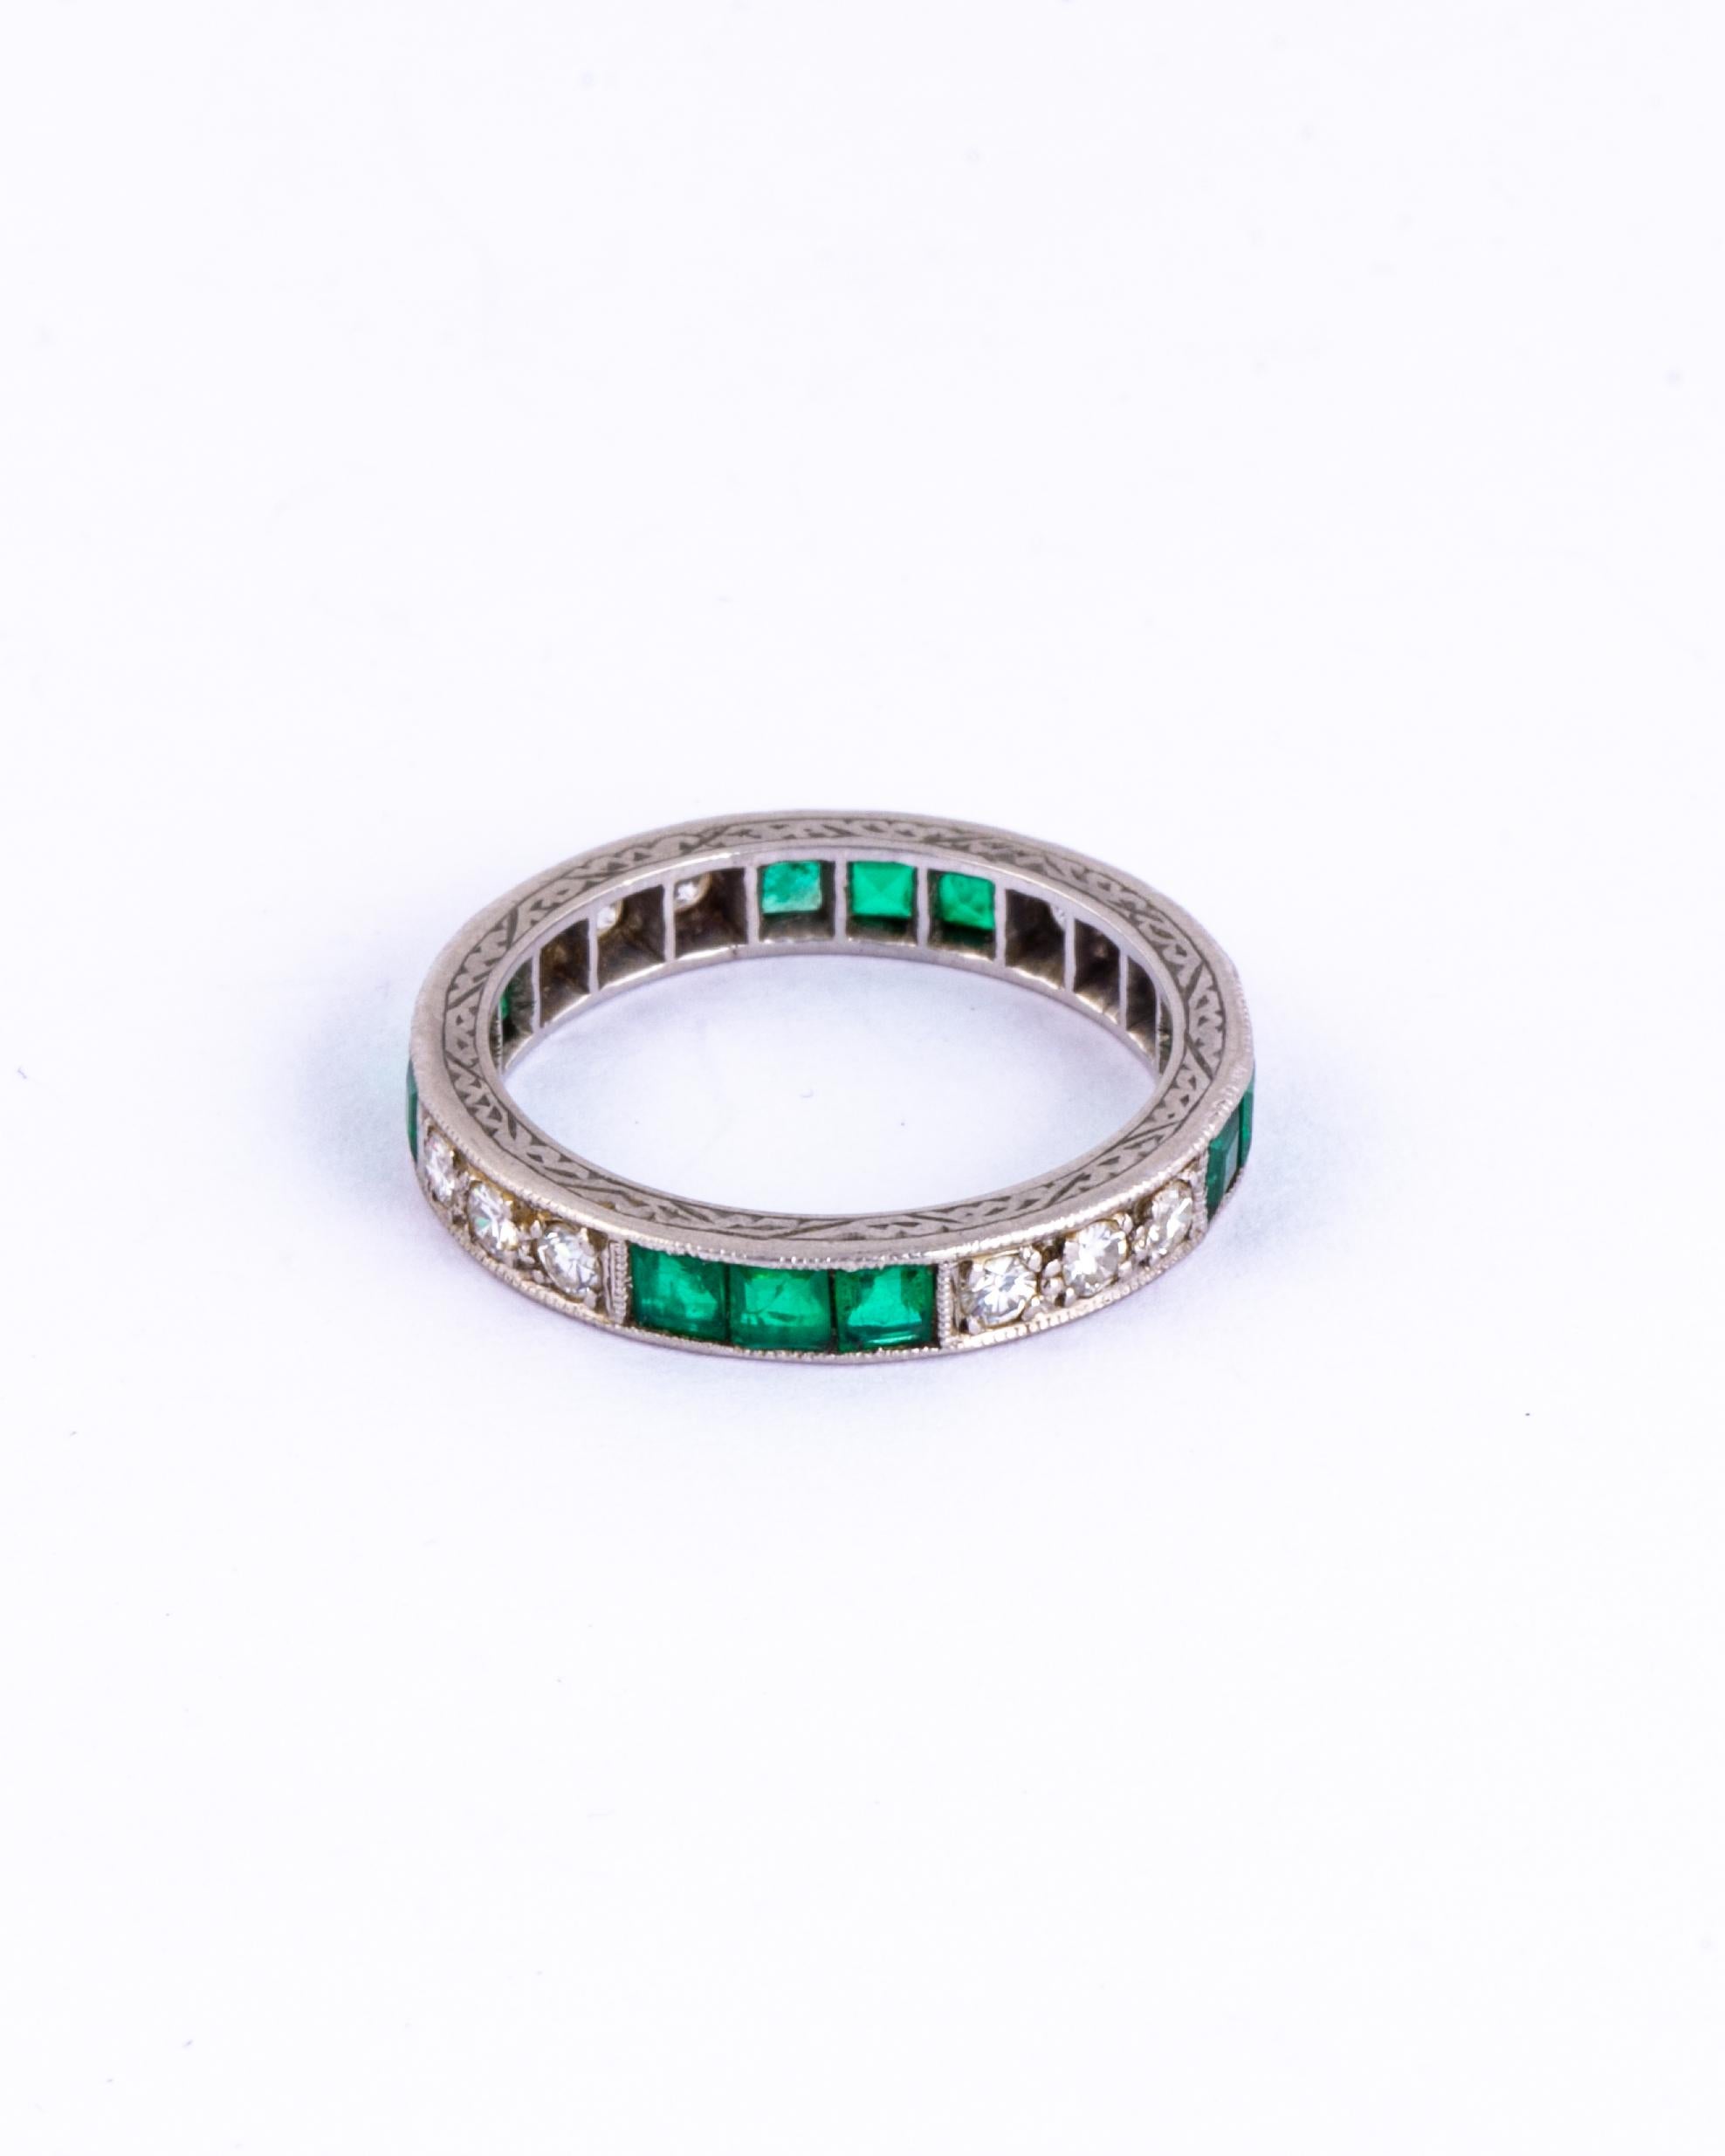 A stunning Art Deco eternity band ring fully set with emeralds and diamonds. Alternating trios of square cut green emeralds measuring 10pts each are set between a trios of round-cut white diamonds measuring 5pts each all around this wonderful ring.